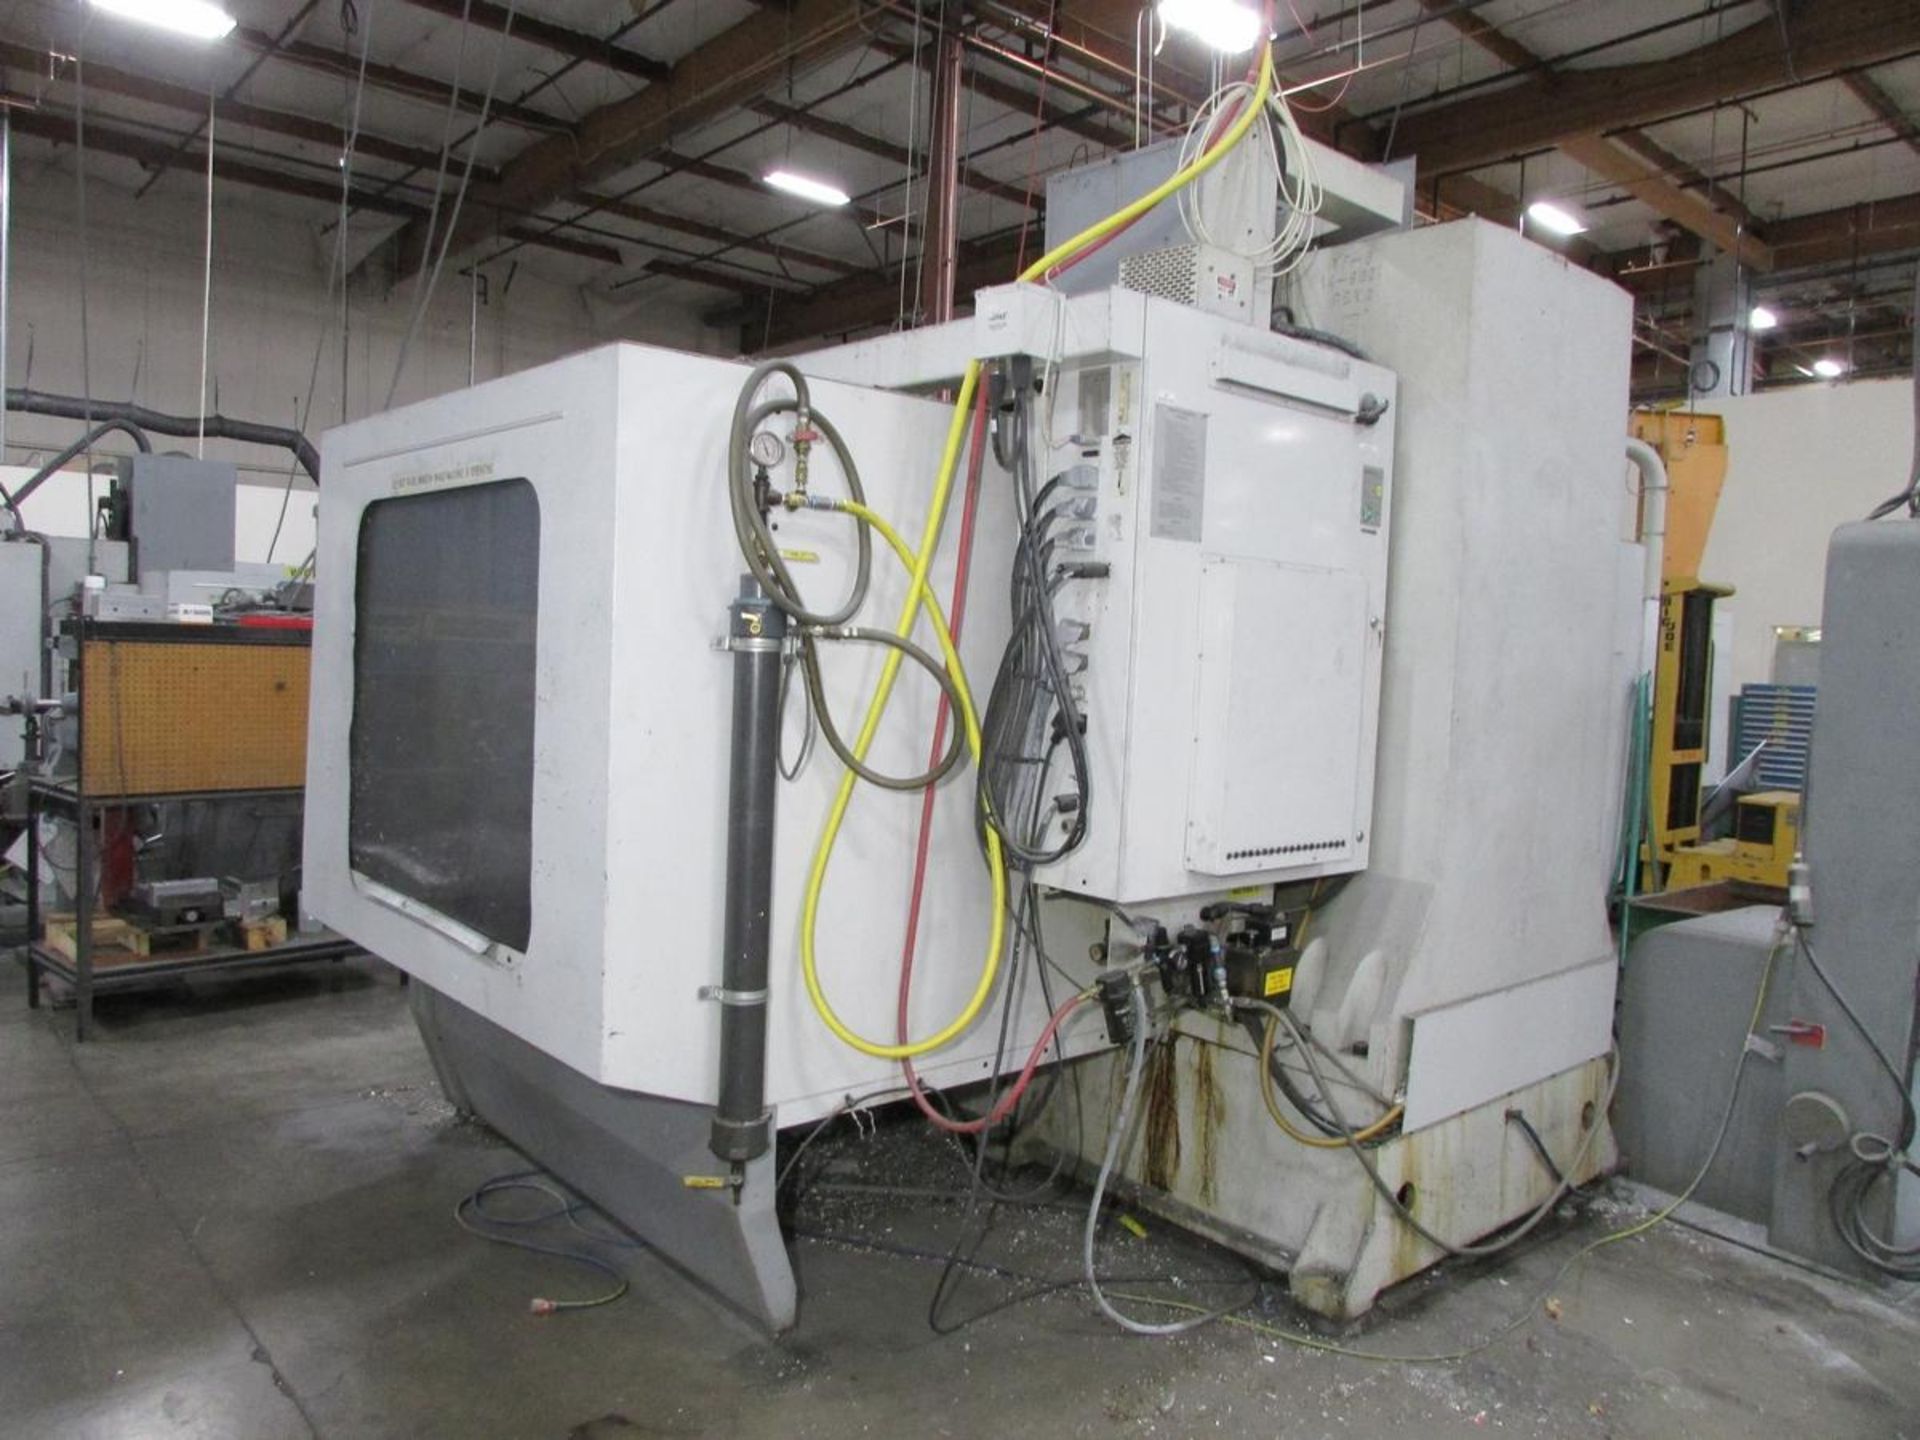 1997 Haas VF-7 4-Axis CNC Vertical Maching Center - Image 18 of 30